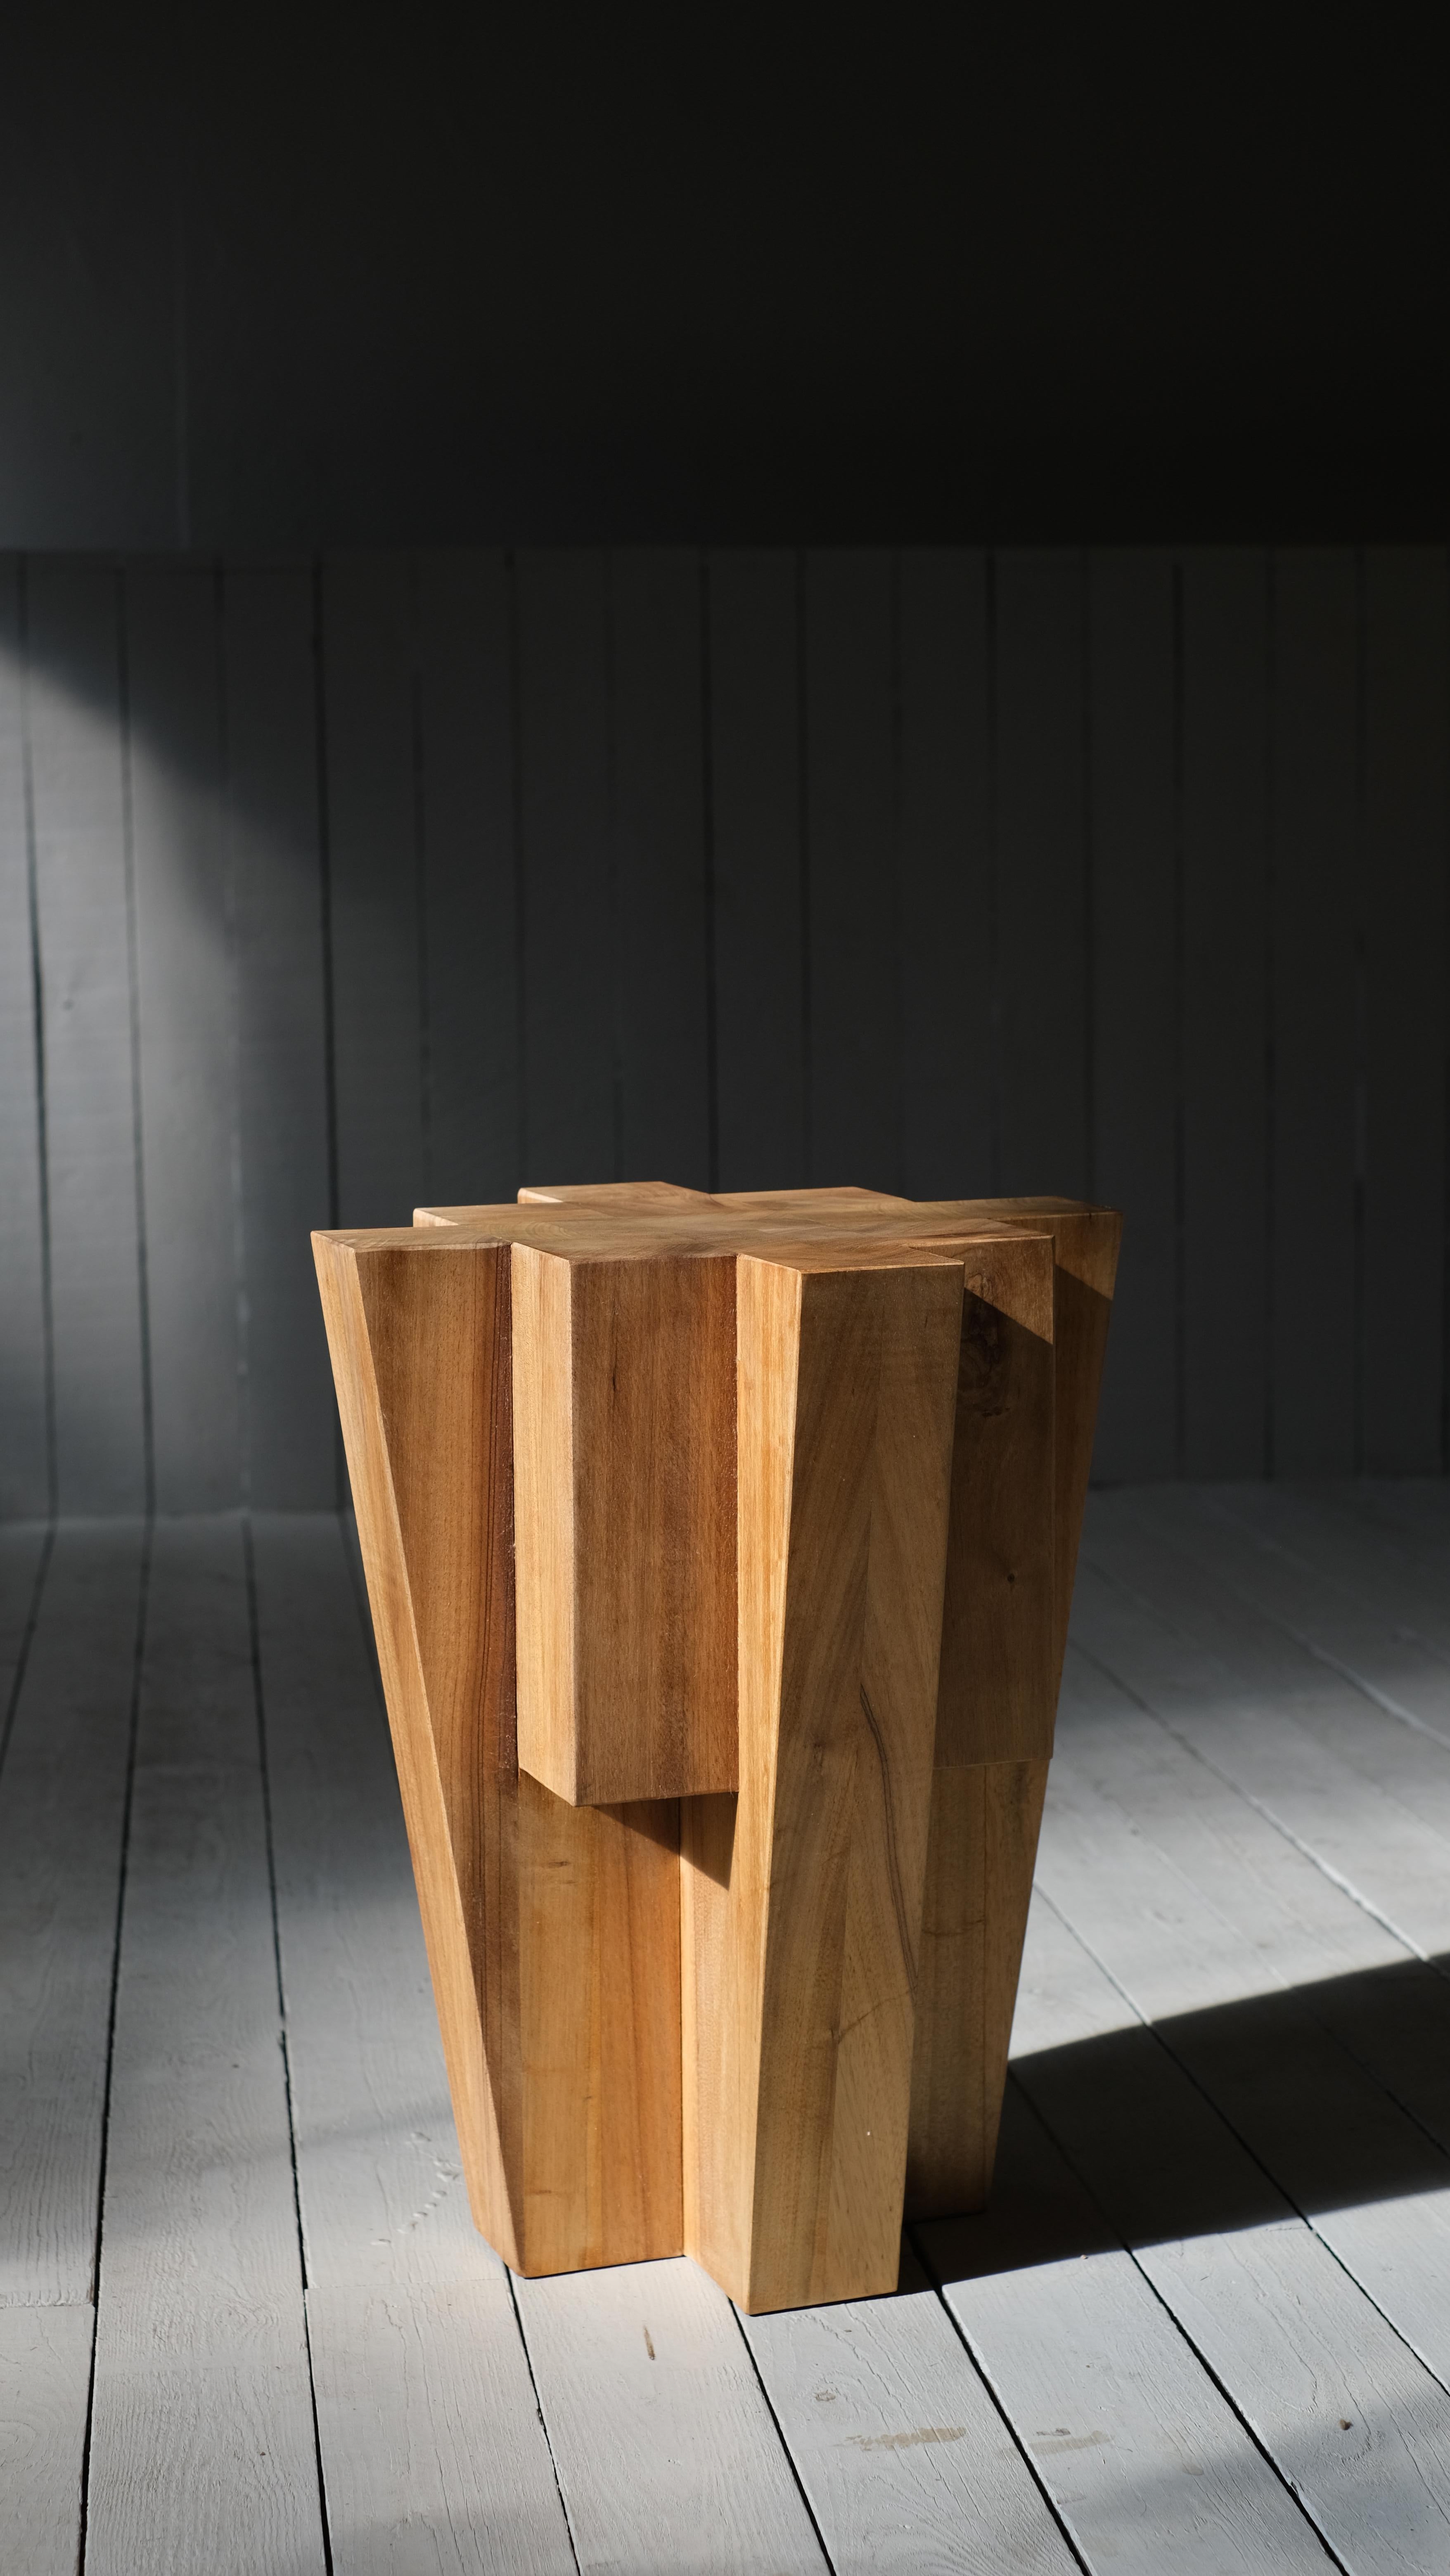 Natural African Walnut Bunker Side Table by Arno Declercq
Dimensions: D 45 x W 45 x H 50 cm. 
Materials: African Walnut.

Arno Declercq
Belgian designer and art dealer who makes bespoke objects with passion for design, atmosphere, history and craft.